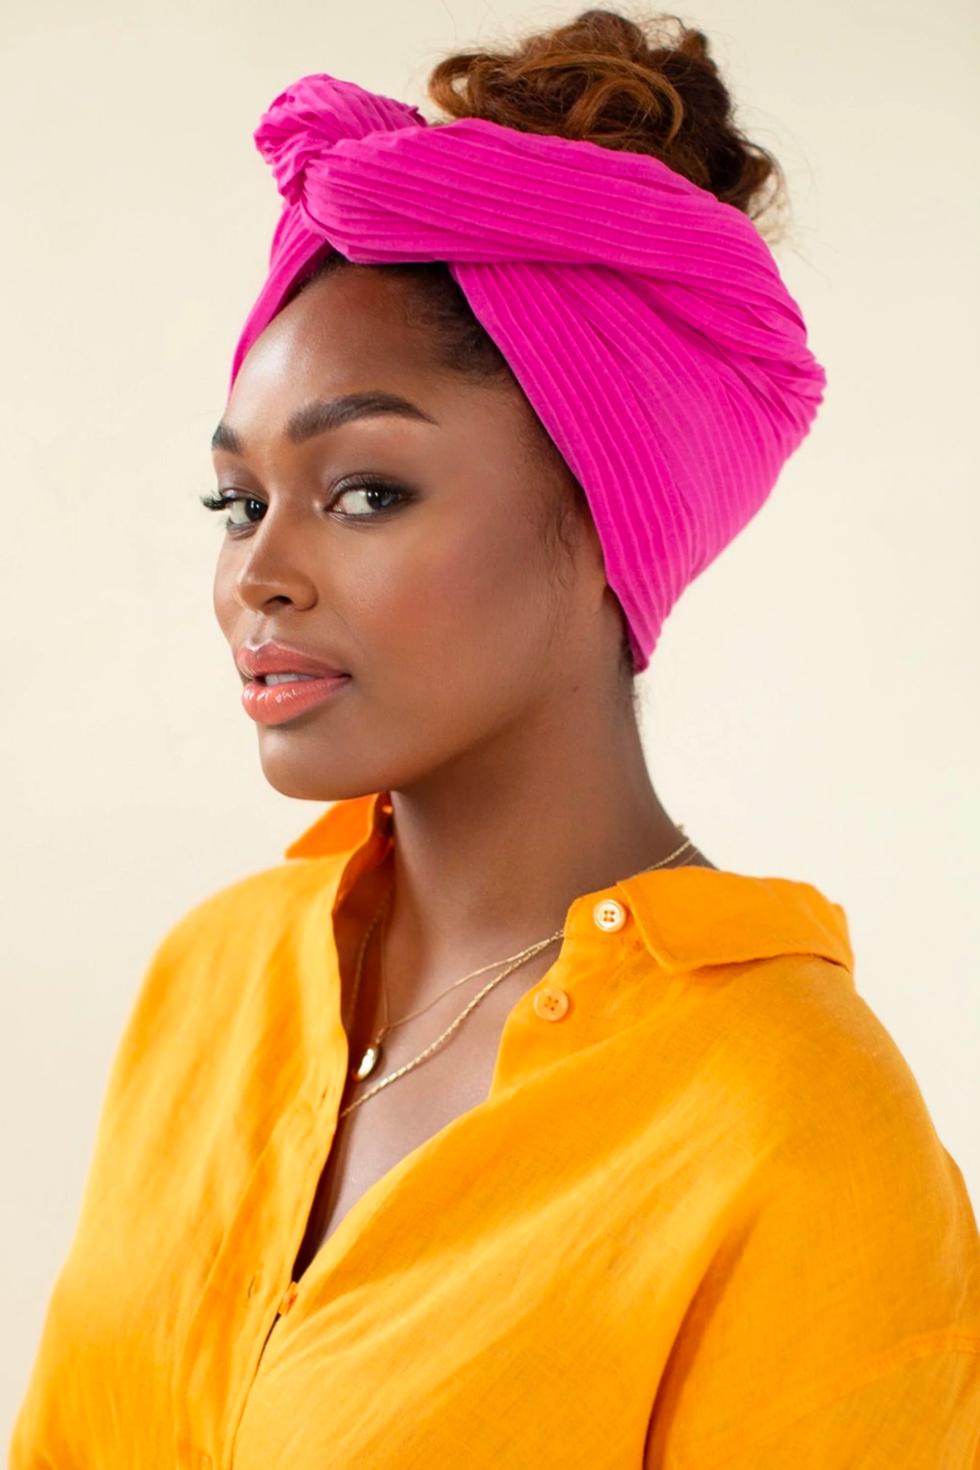 Pleated Head Wrap in Rose Violet